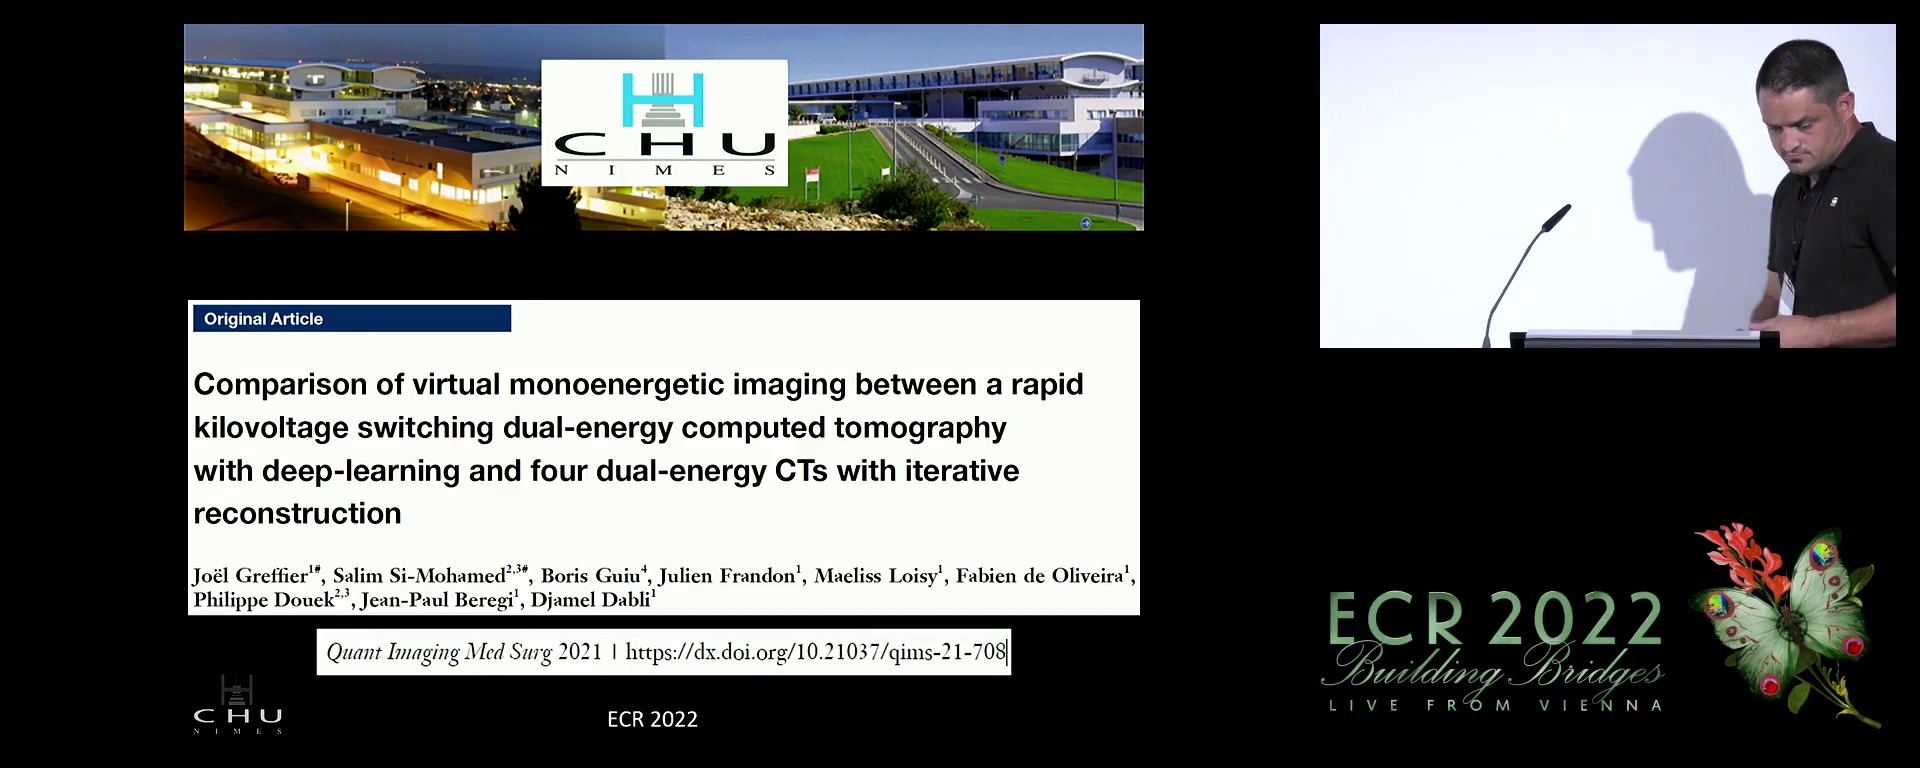 Comparison of virtual monoenergetic imaging between a rapid kilovoltage switching dual-Energy CT with deep-learning and four dual-Energy CTs with iterative reconstruction - Joel Greffier, Nimes / FR